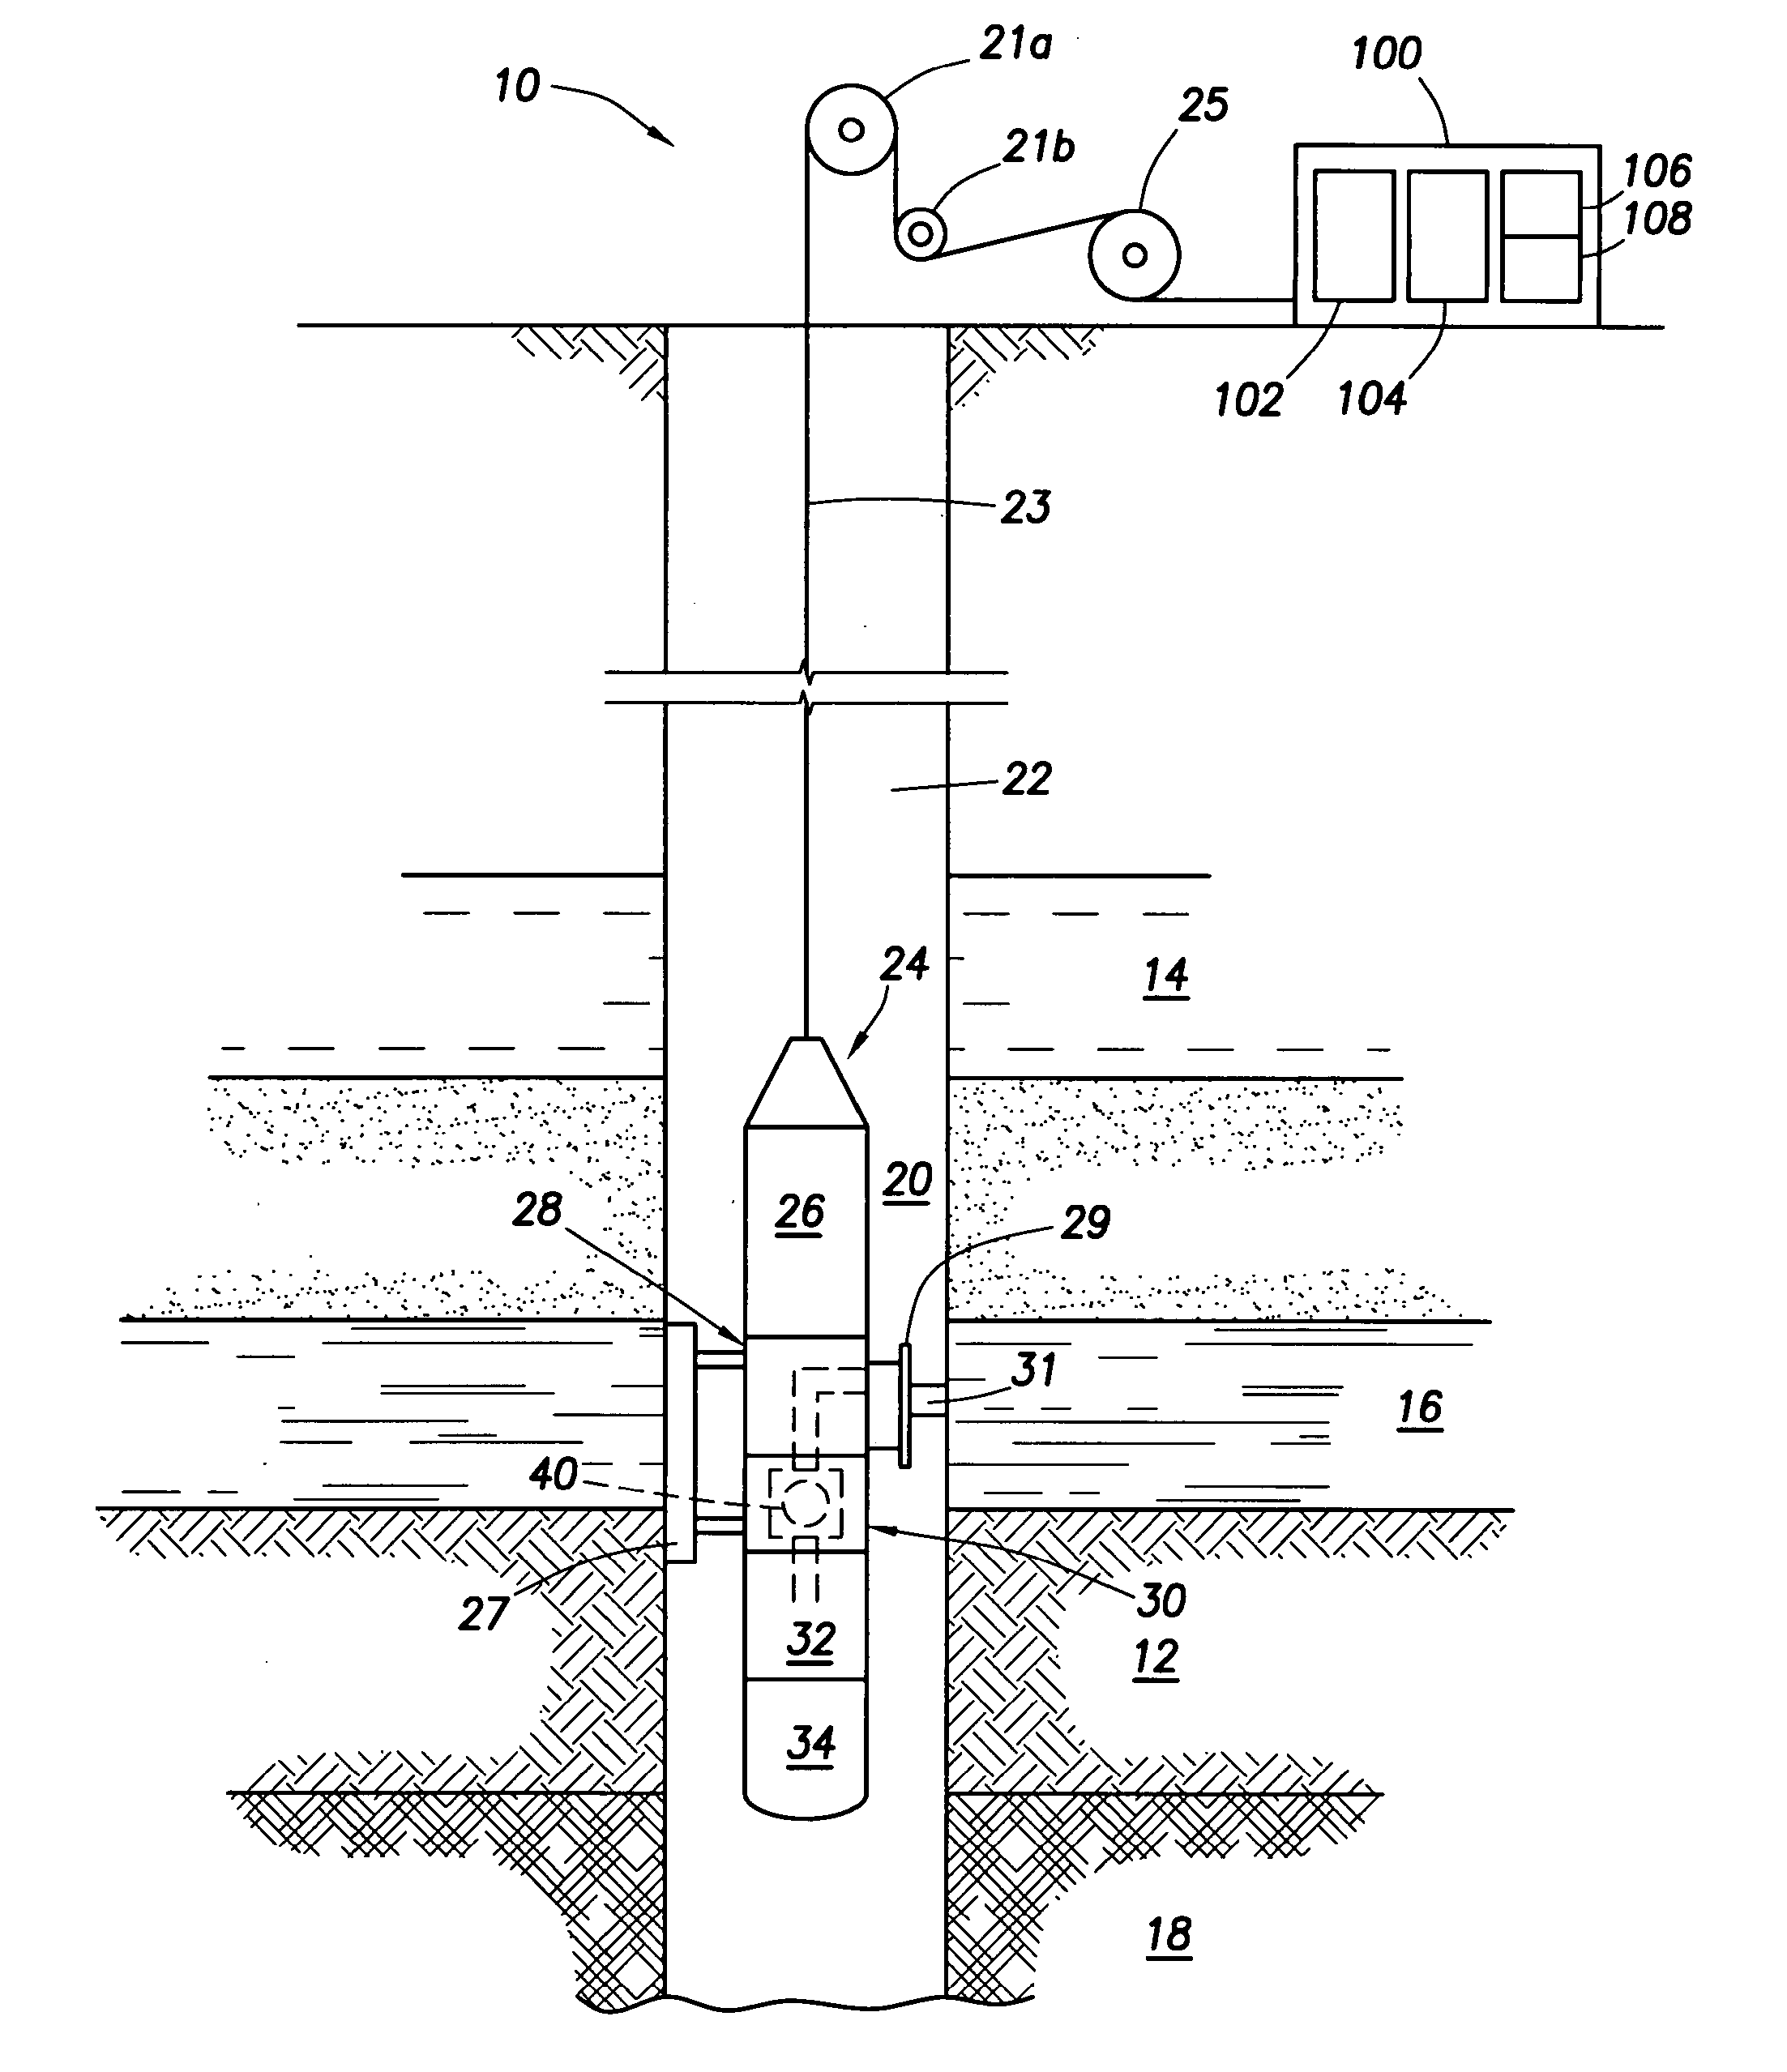 Terahertz analysis of a fluid from an earth formation using a downhole tool